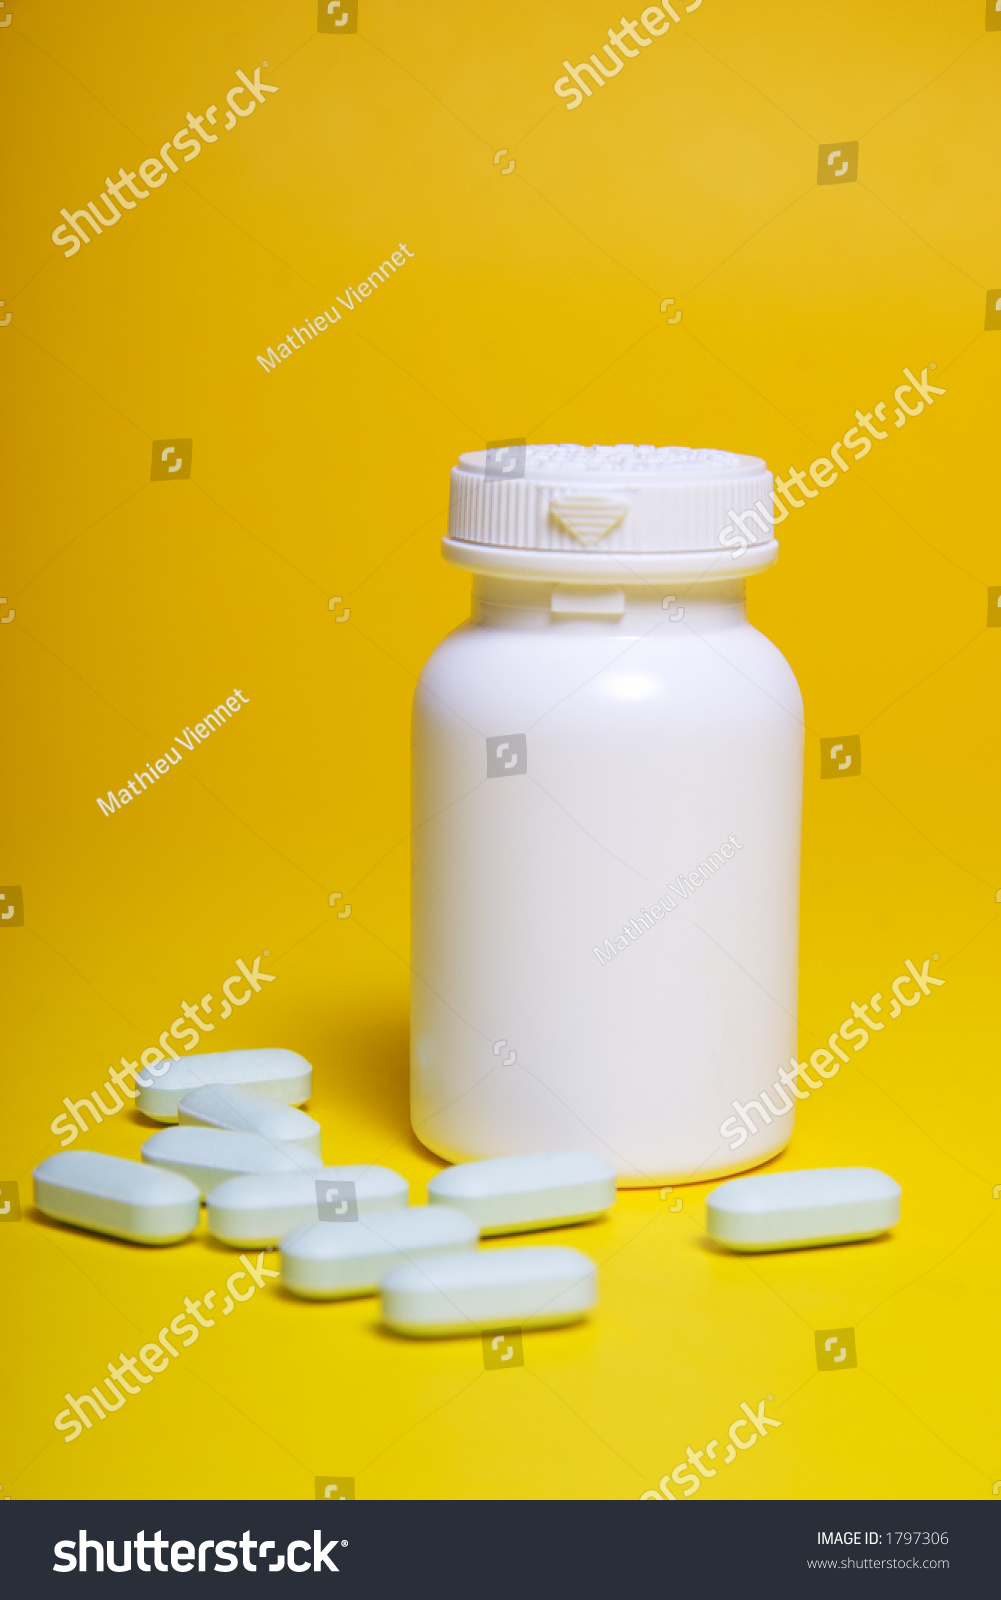 Blue Pills Bottle On Yellow Background Stock Photo Edit Now 1797306